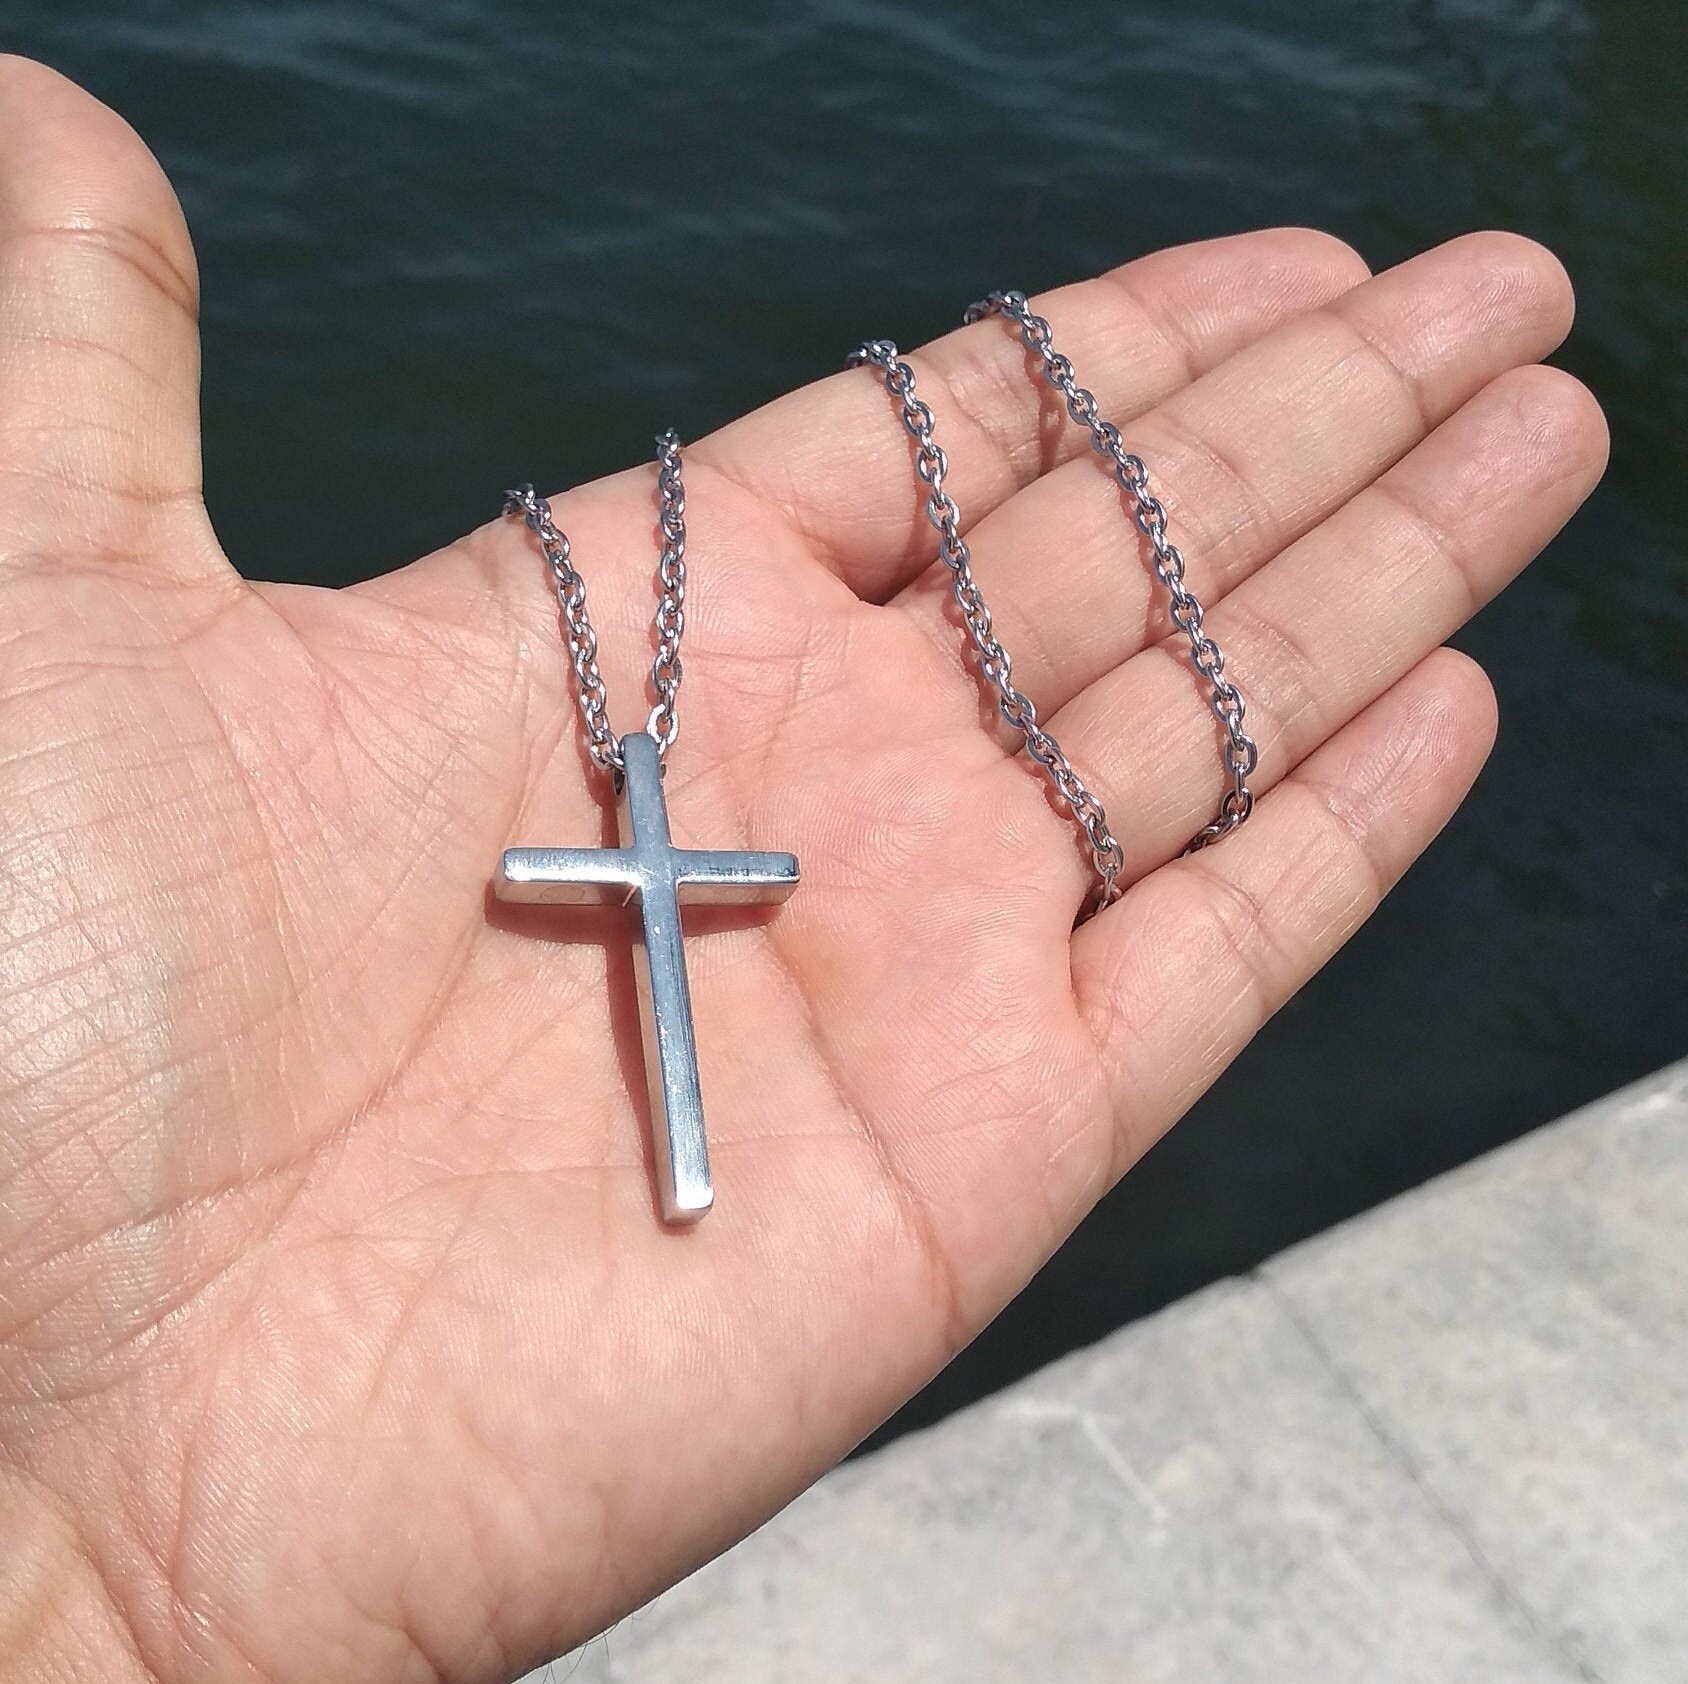 Classic Cross Pendant Stainless Steel Necklace Chains